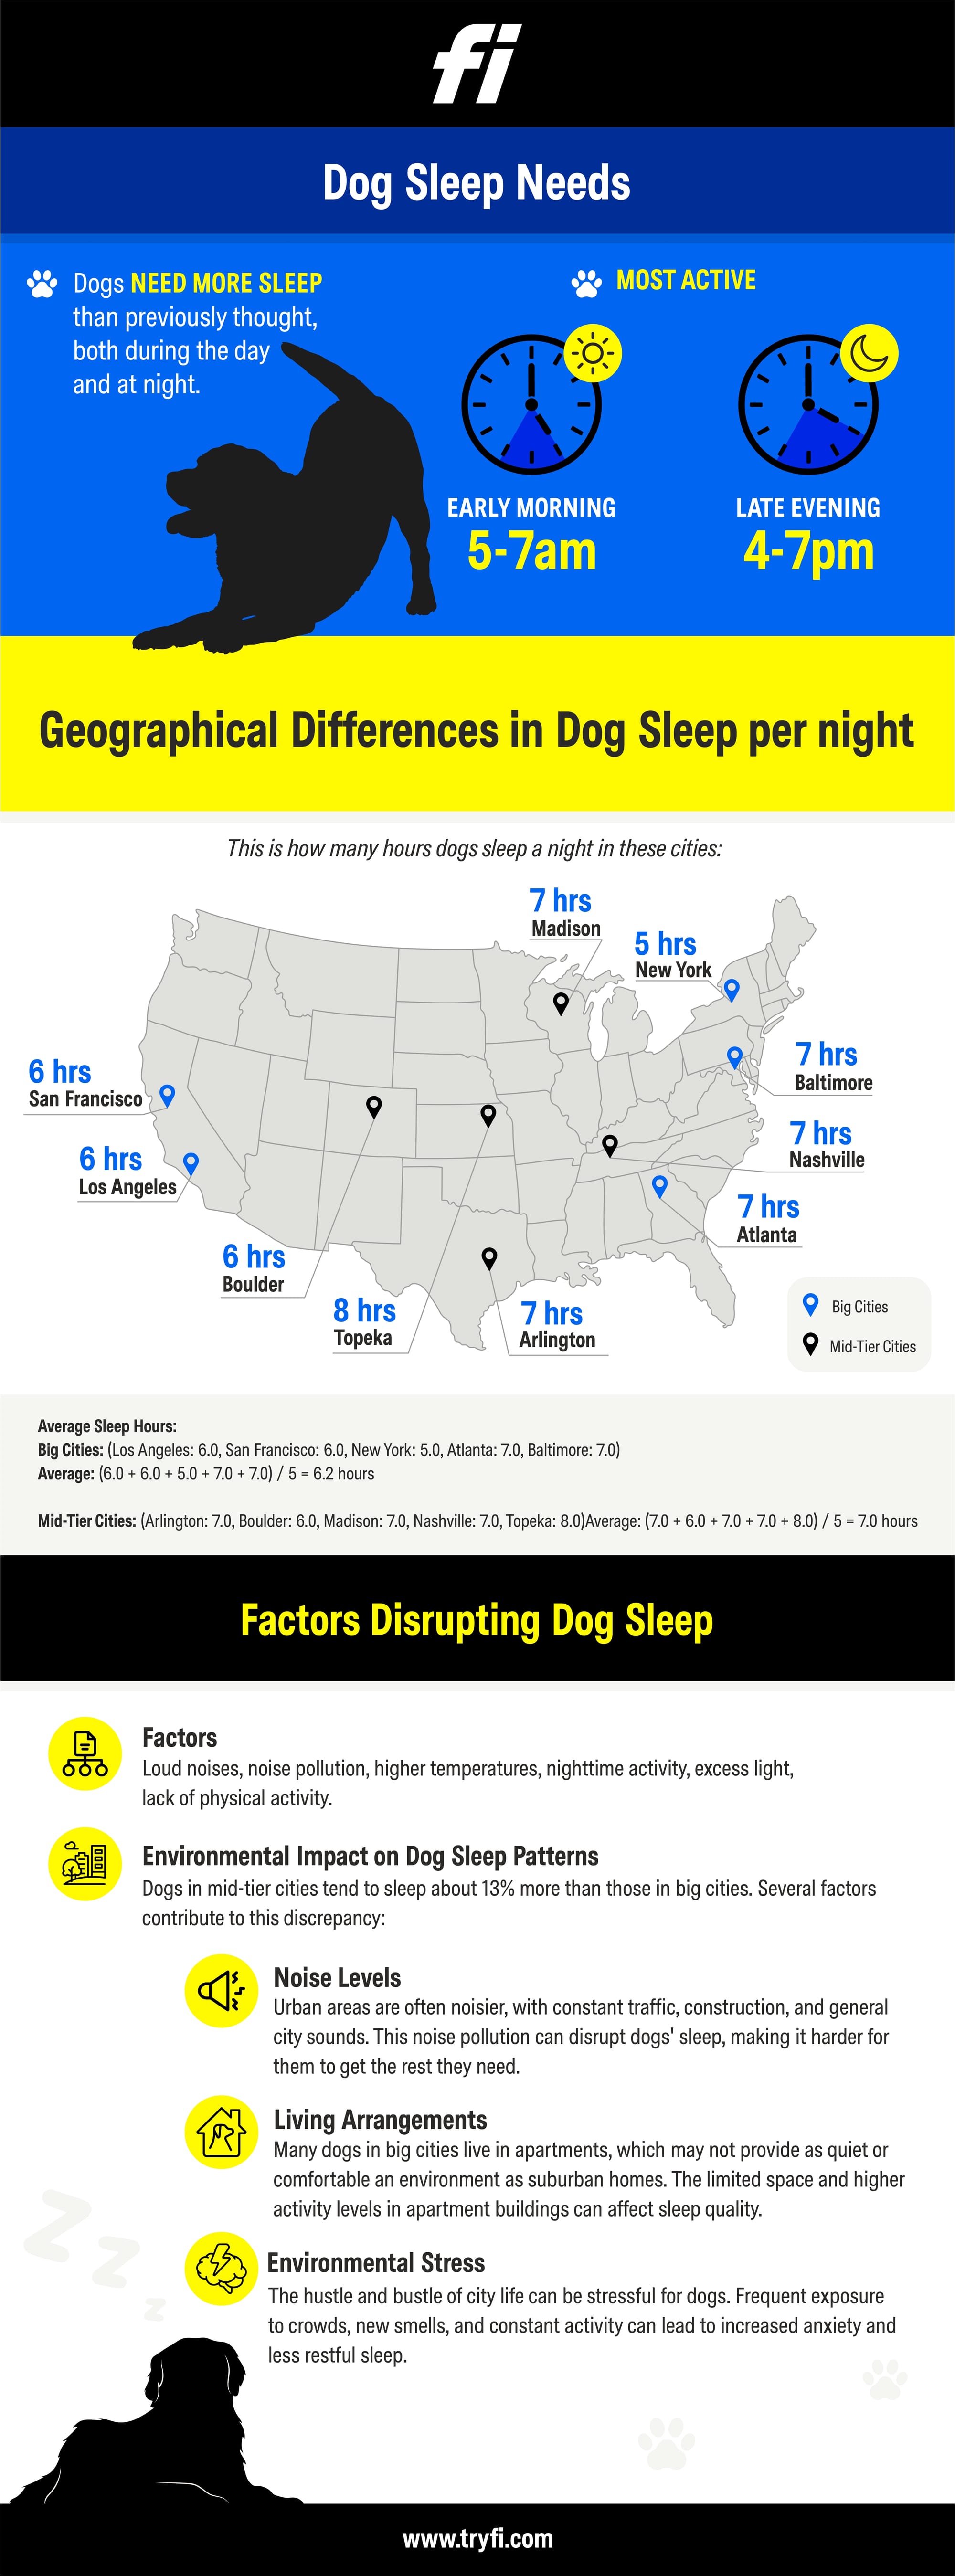 sleep chart for dogs based on US locations